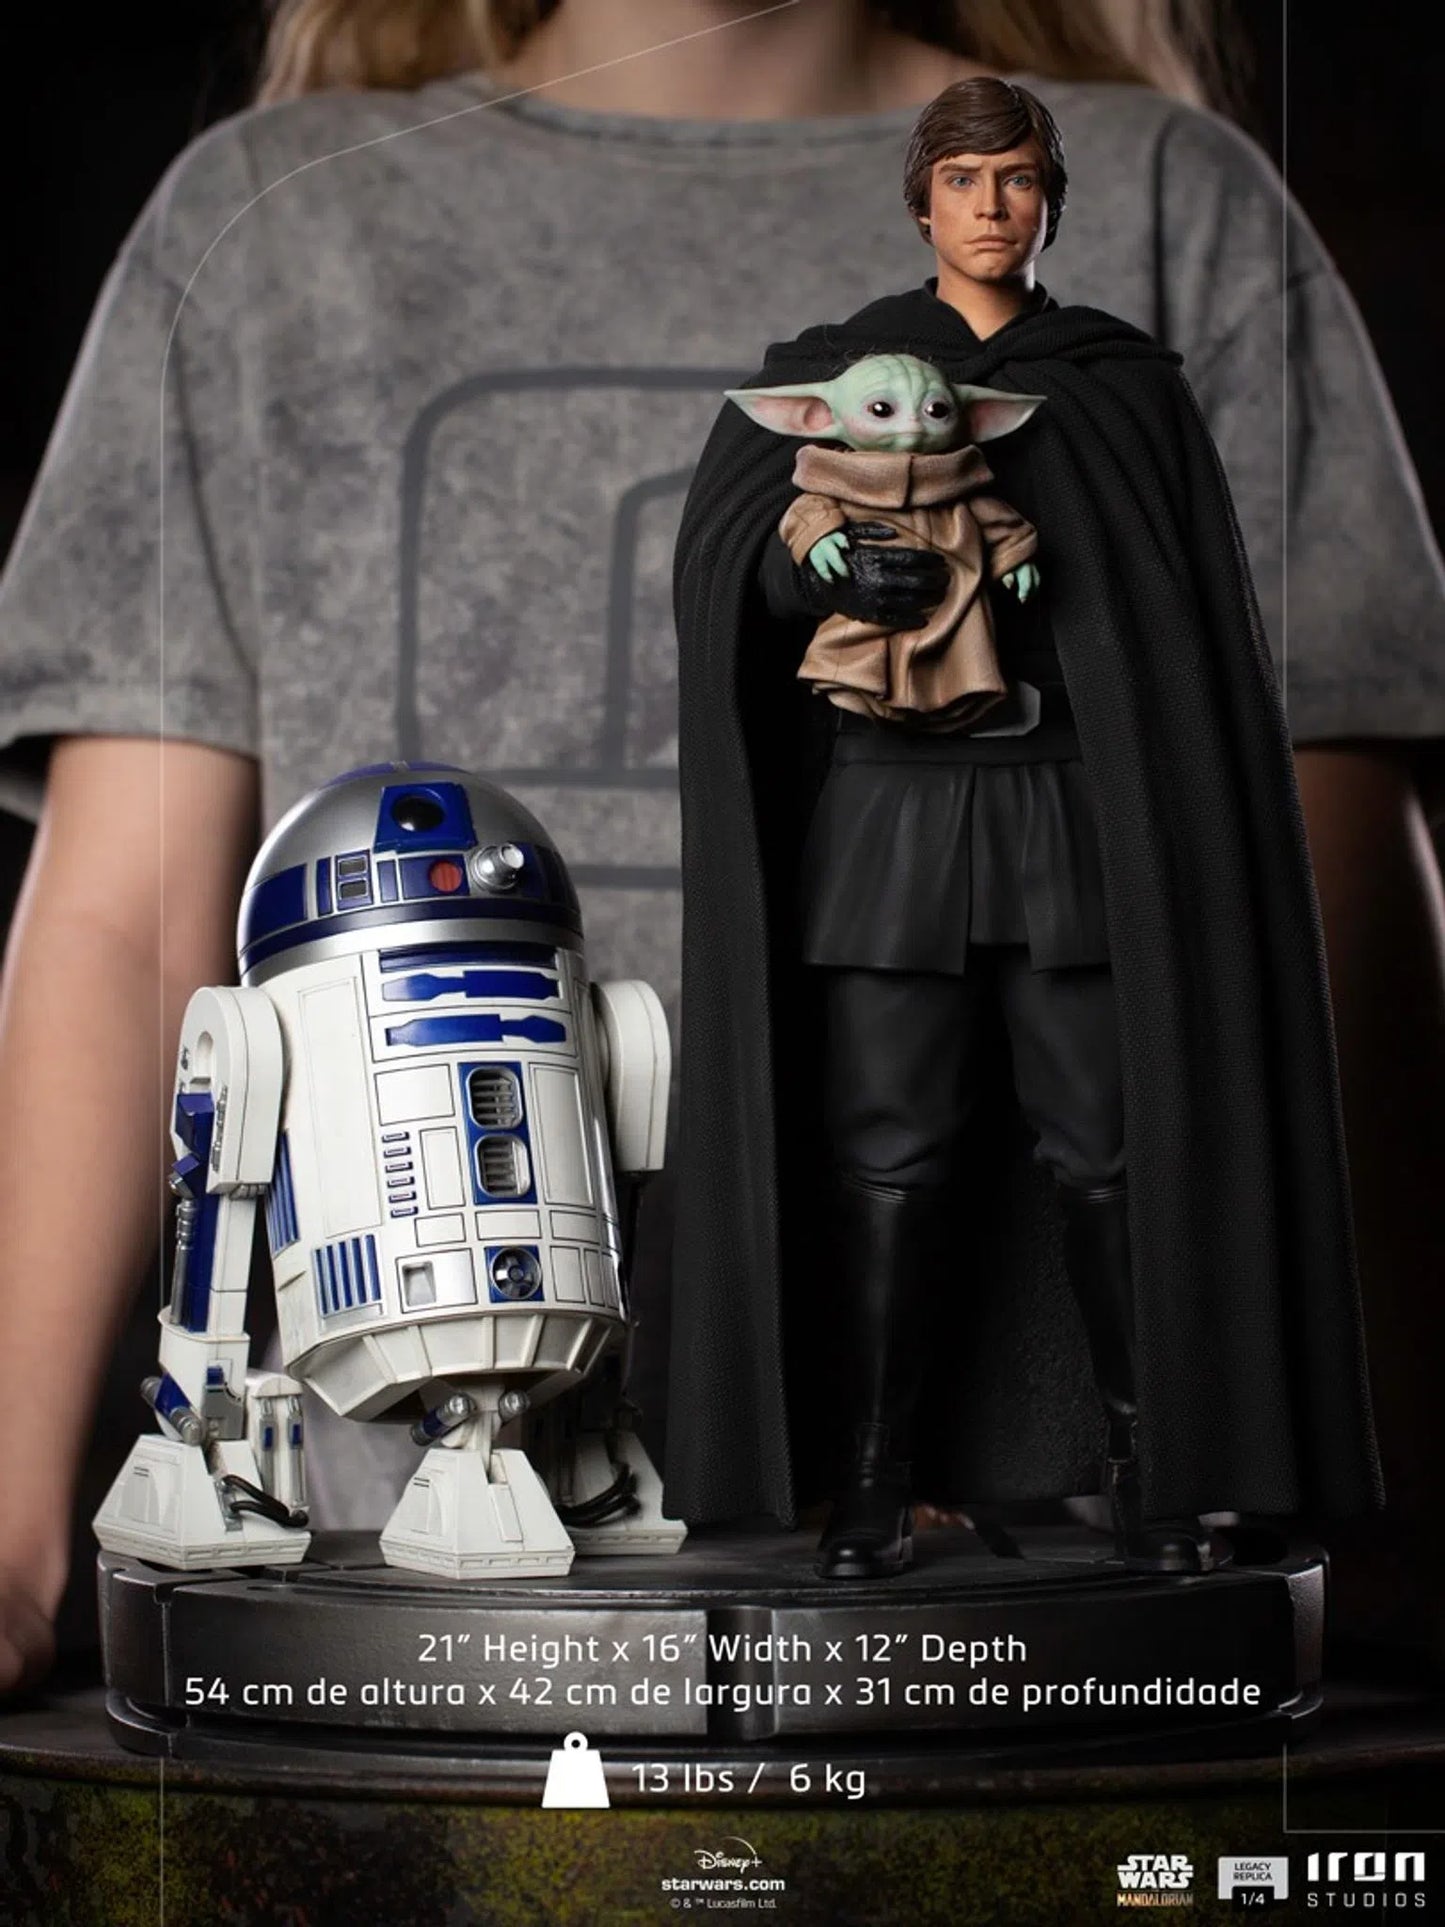 IRON STUDIOS  LUKE SKYWALKER, R2-D2 AND GROGU LEGACY REPLICA 1/4 - LUCSWR49321-14 - Anotoys Collectibles